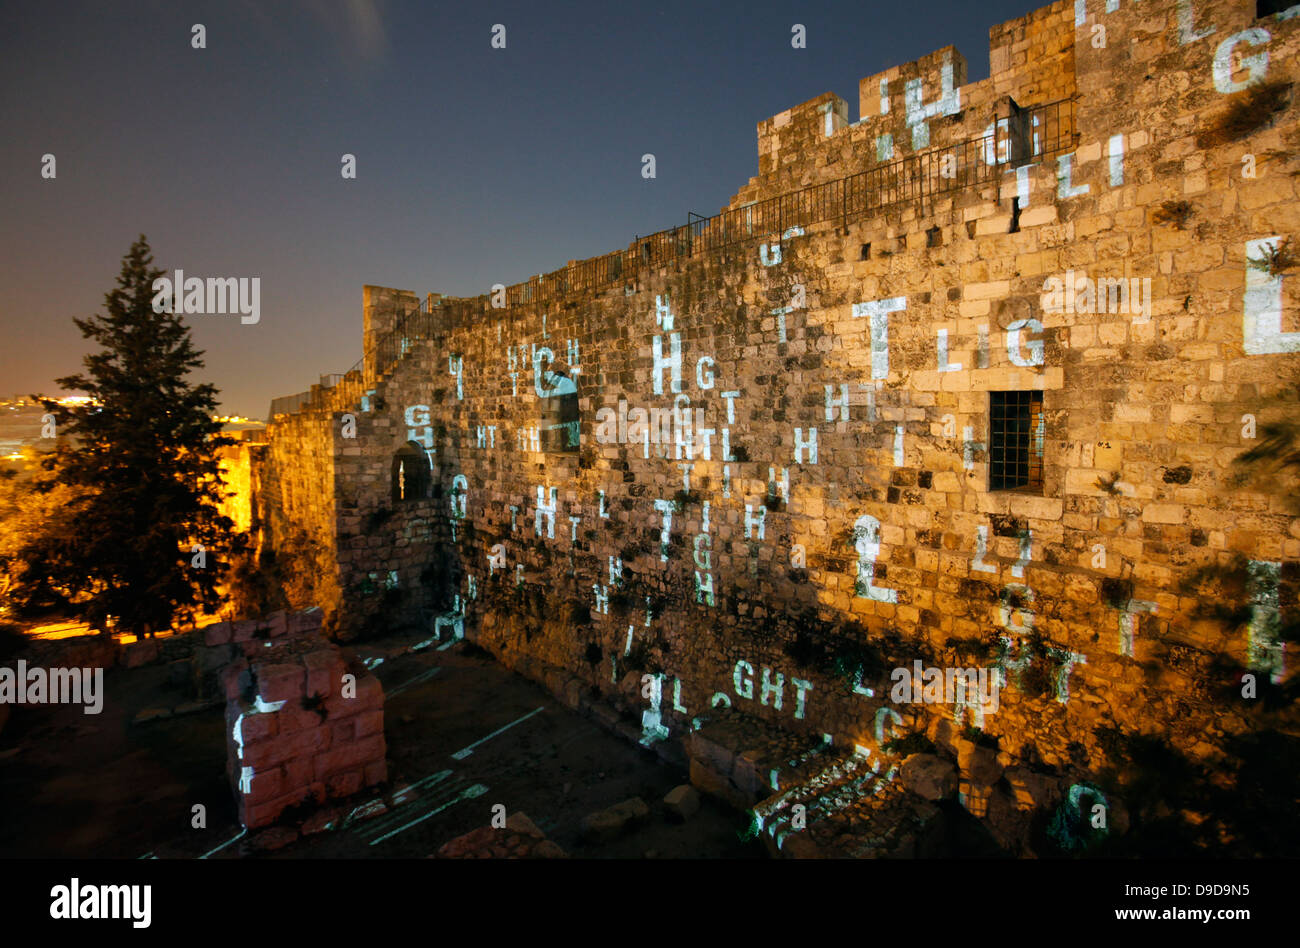 light show depicting the word Light in English projected over old city walls in Hatkuma garden during the Jerusalem Festival of Light in Israel which takes place annually around the old city with special effects illuminating historical sites and displays the work of leading international artists. Stock Photo